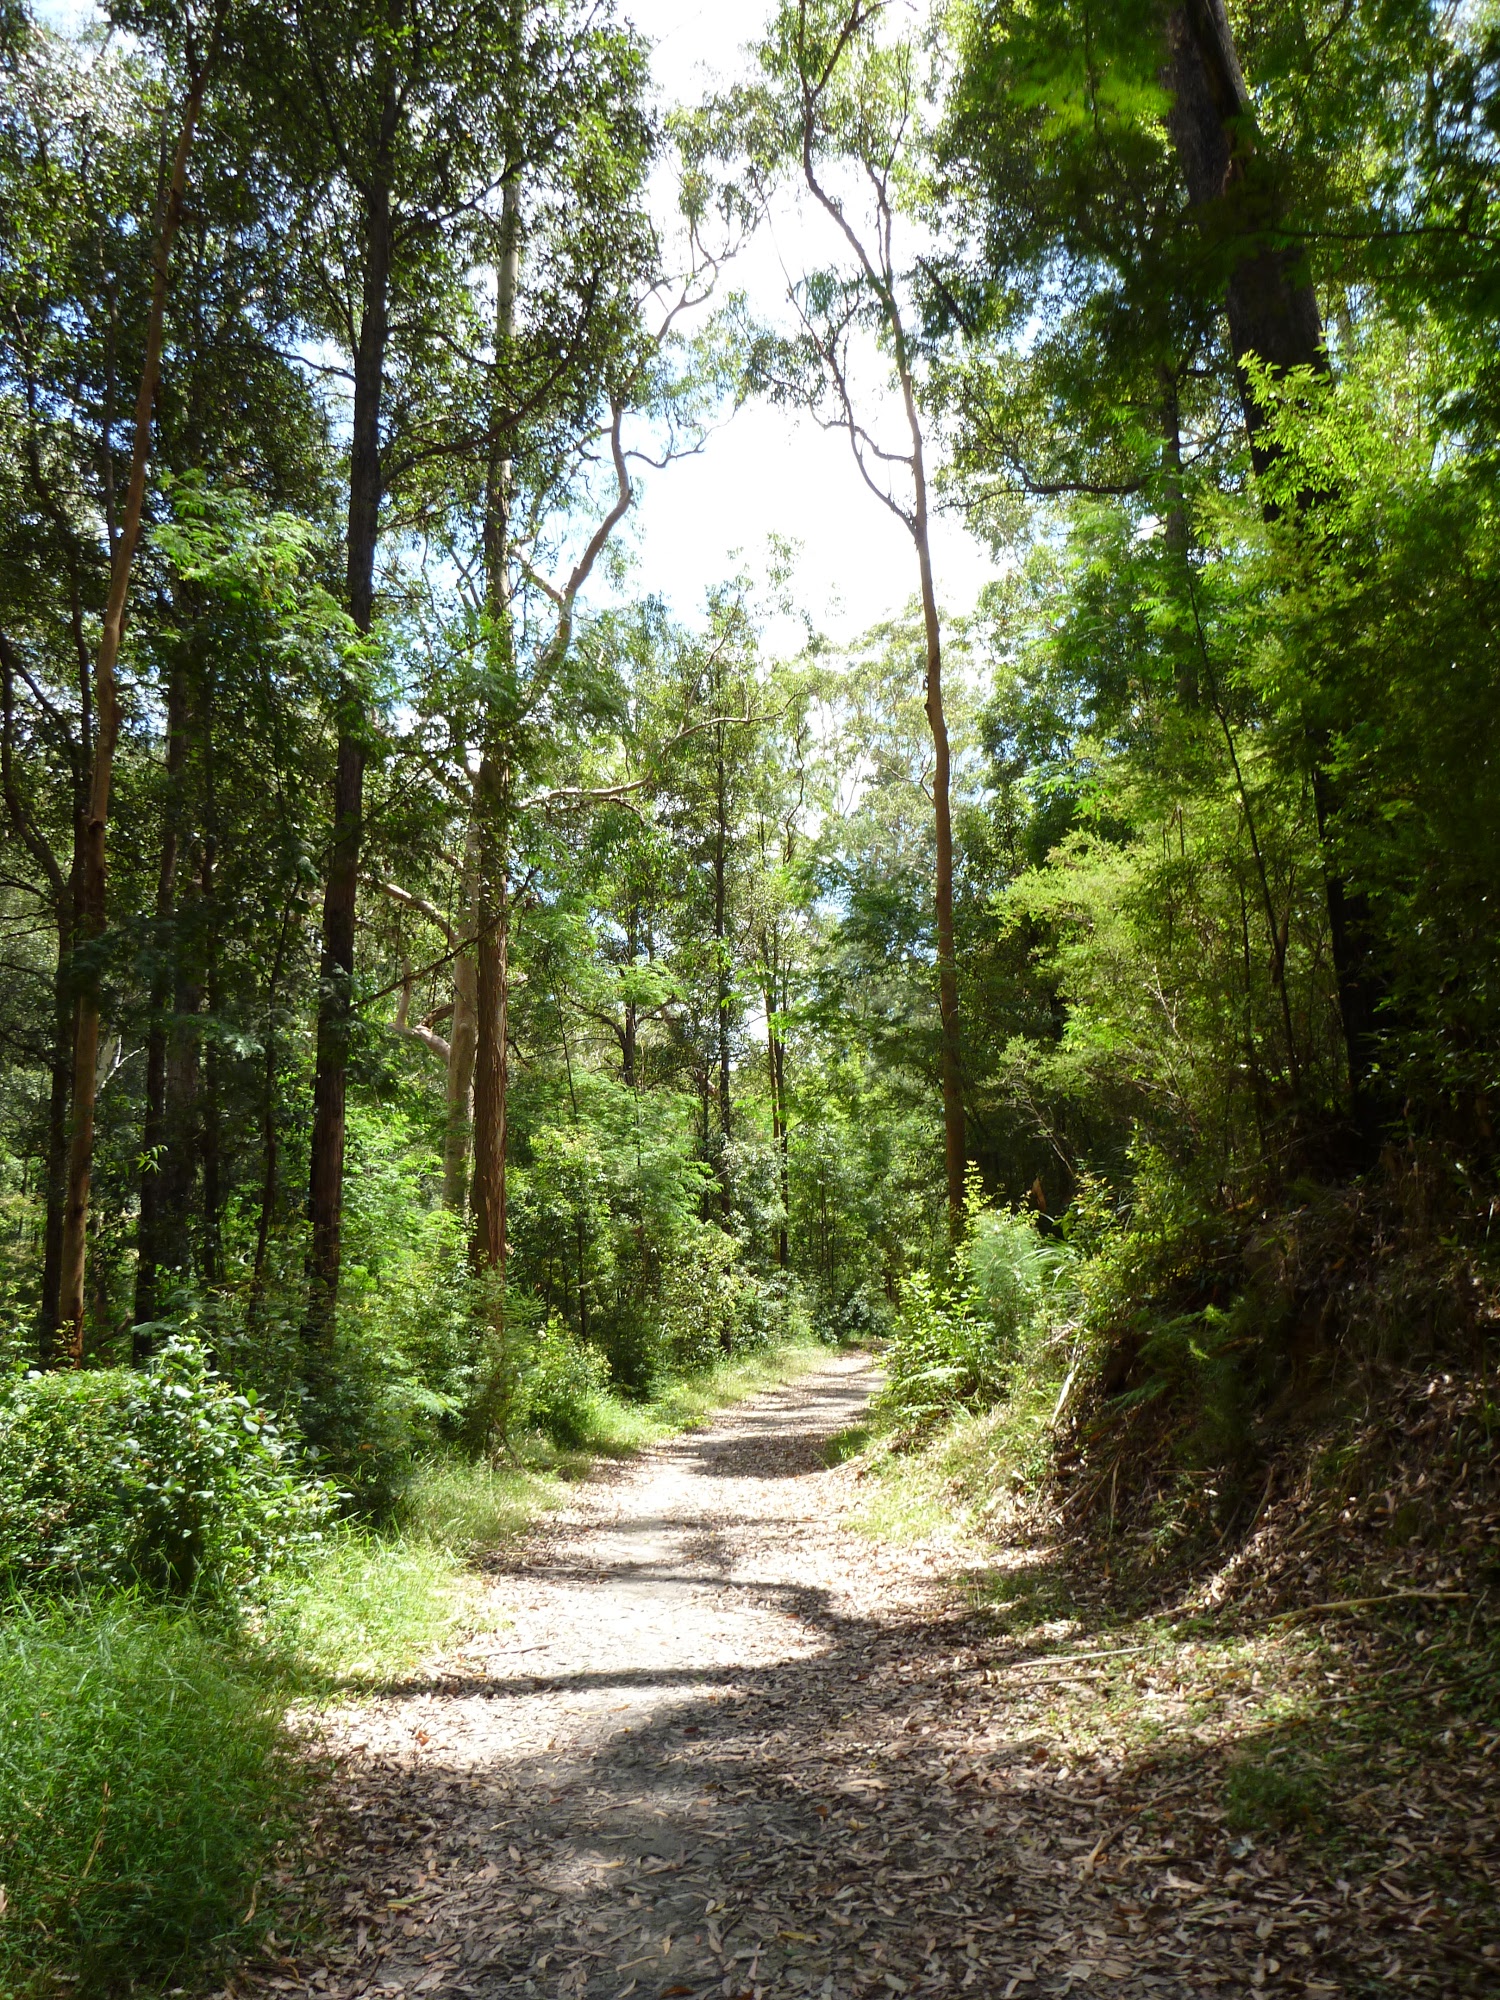 The tall wooded forest near the STEP track